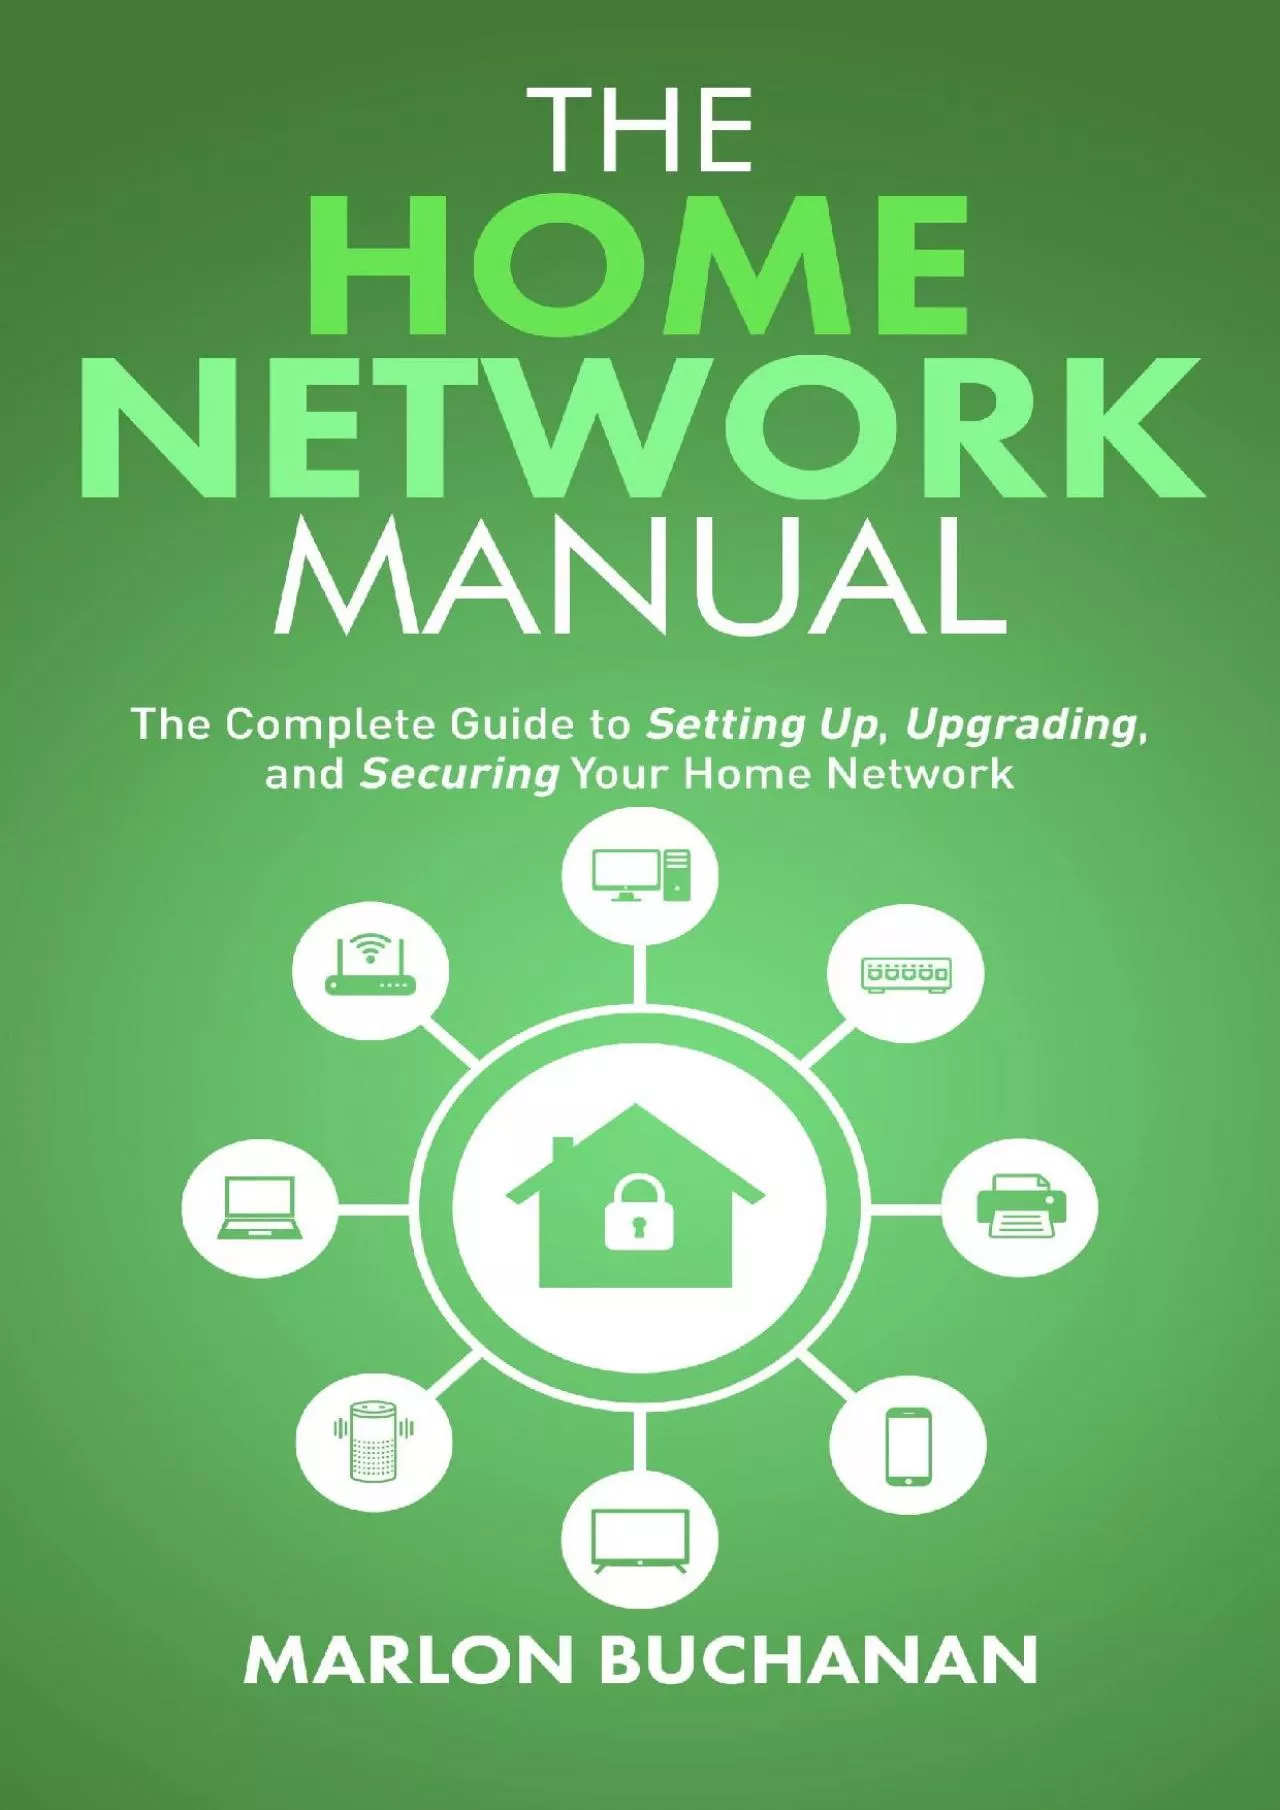 (BOOK)-The Home Network Manual: The Complete Guide to Setting Up, Upgrading, and Securing